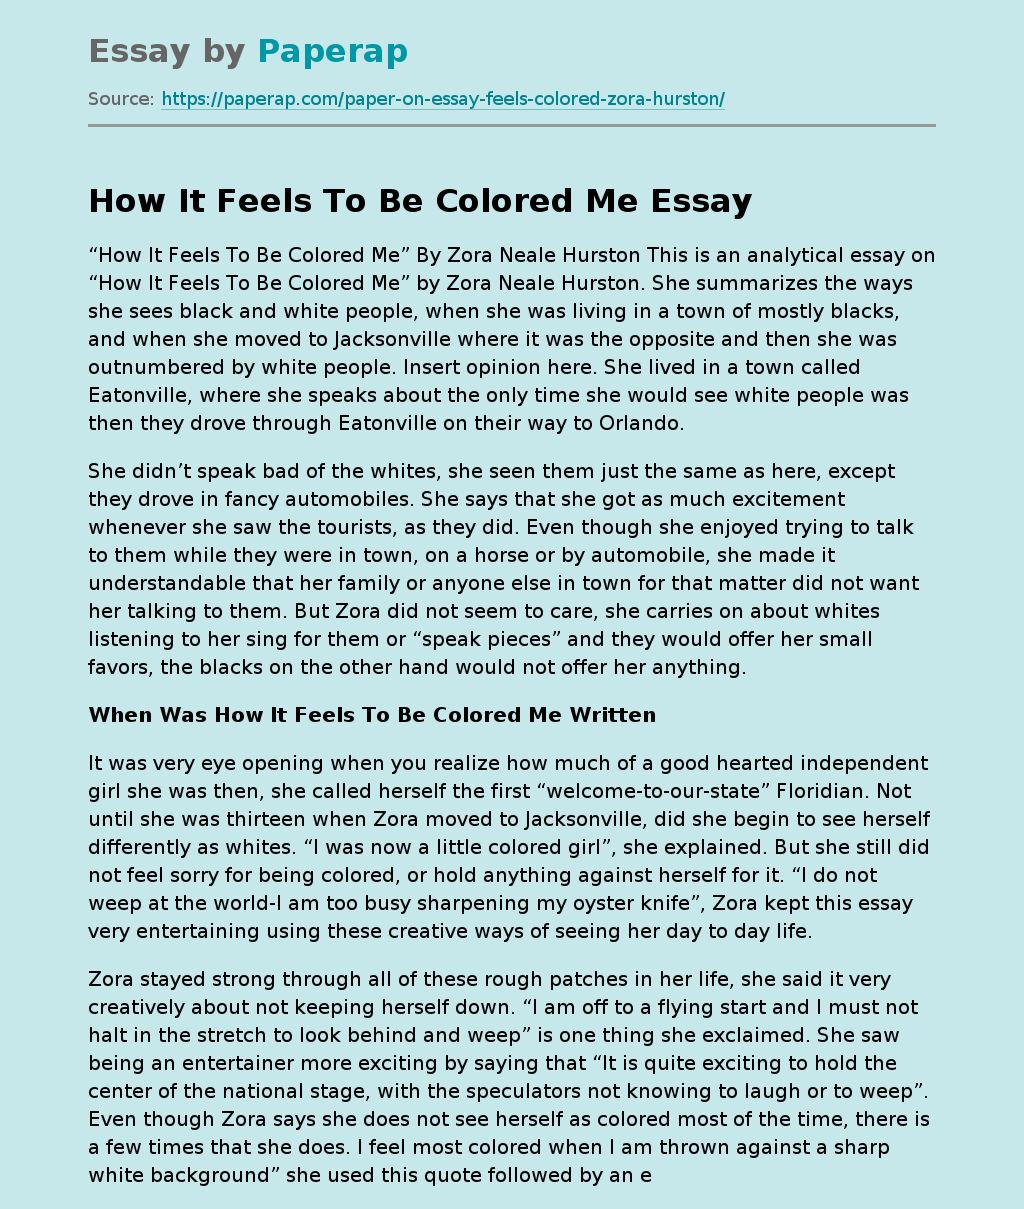 Analyzing Zora Neale Hurston's How It Feels To Be Colored Me